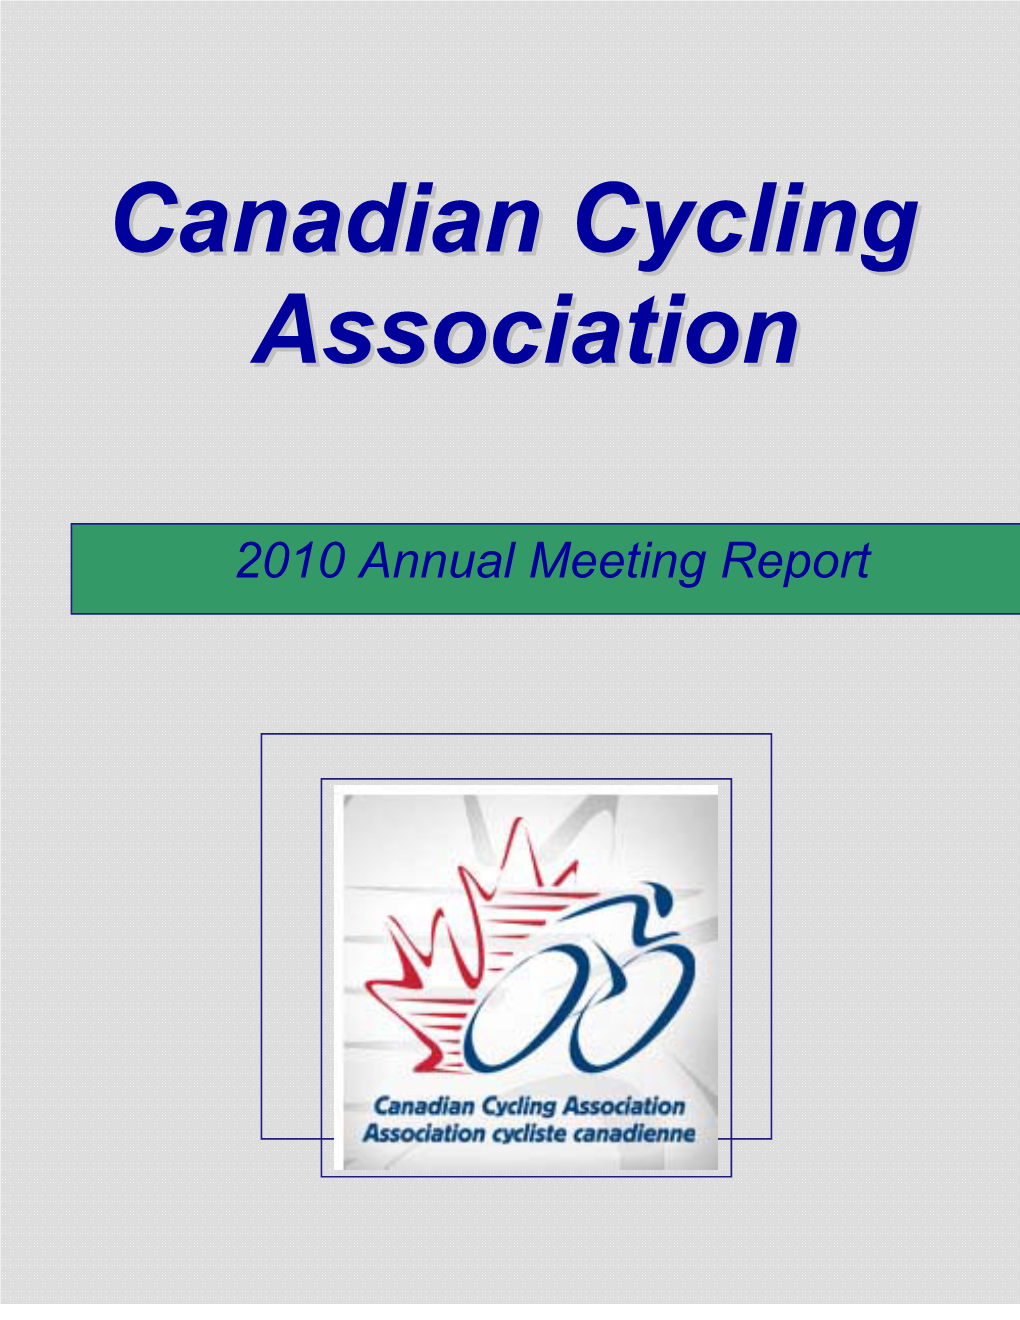 Canadian Cycling Association’S Journey Through the Past 12 Months